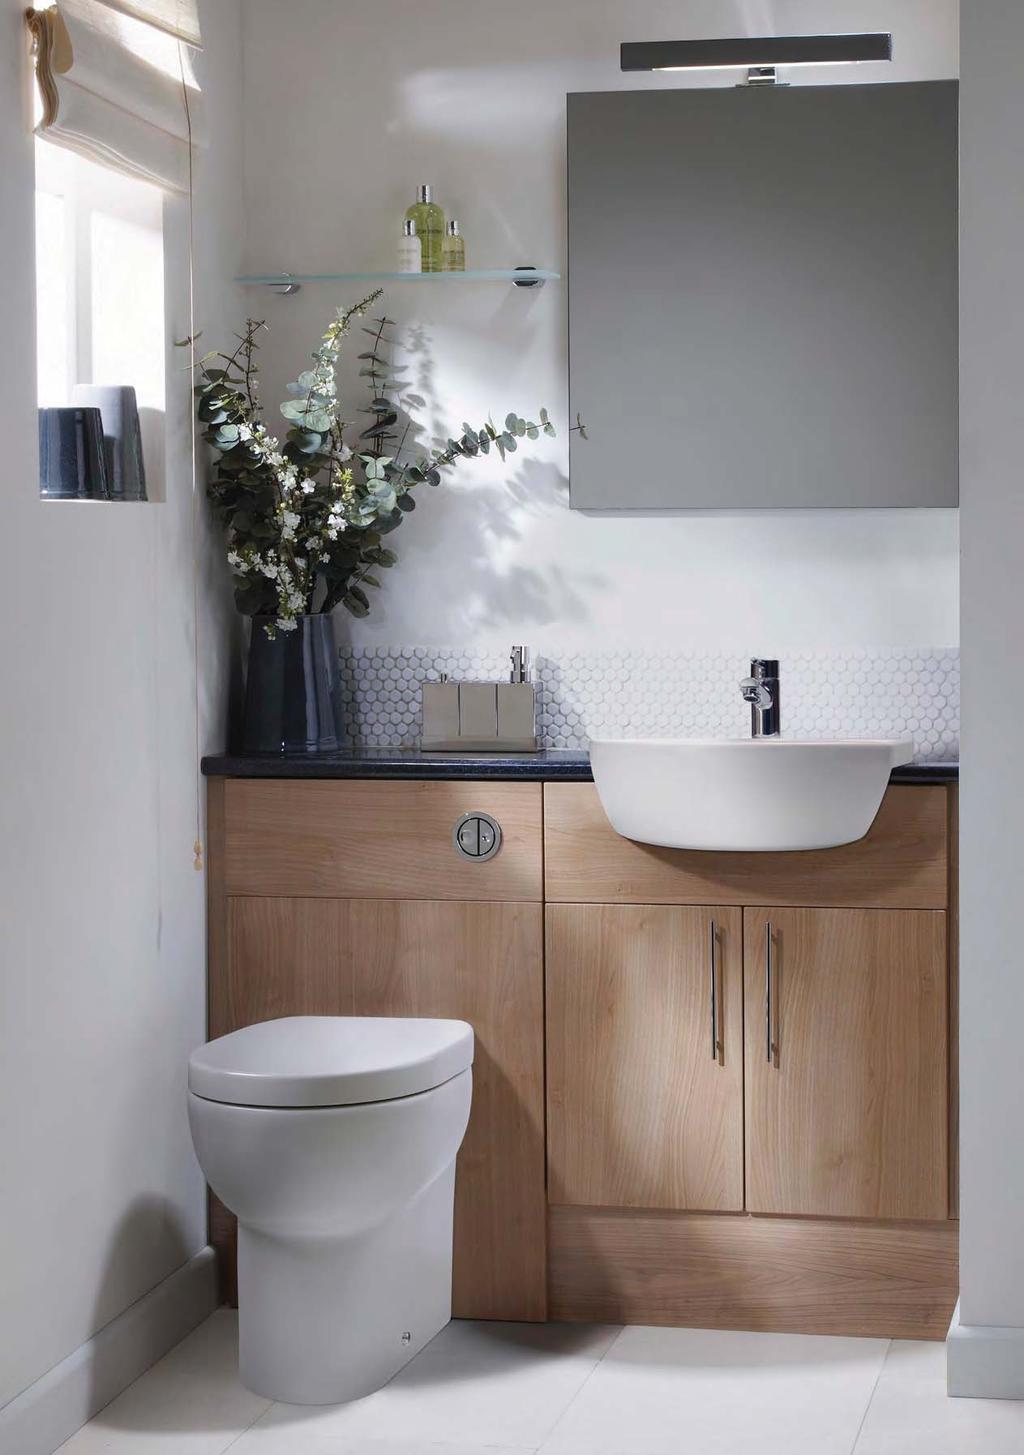 Zest semi countertop basins standard and slimline options available Back to wall pans Options include a standard 500mm and an